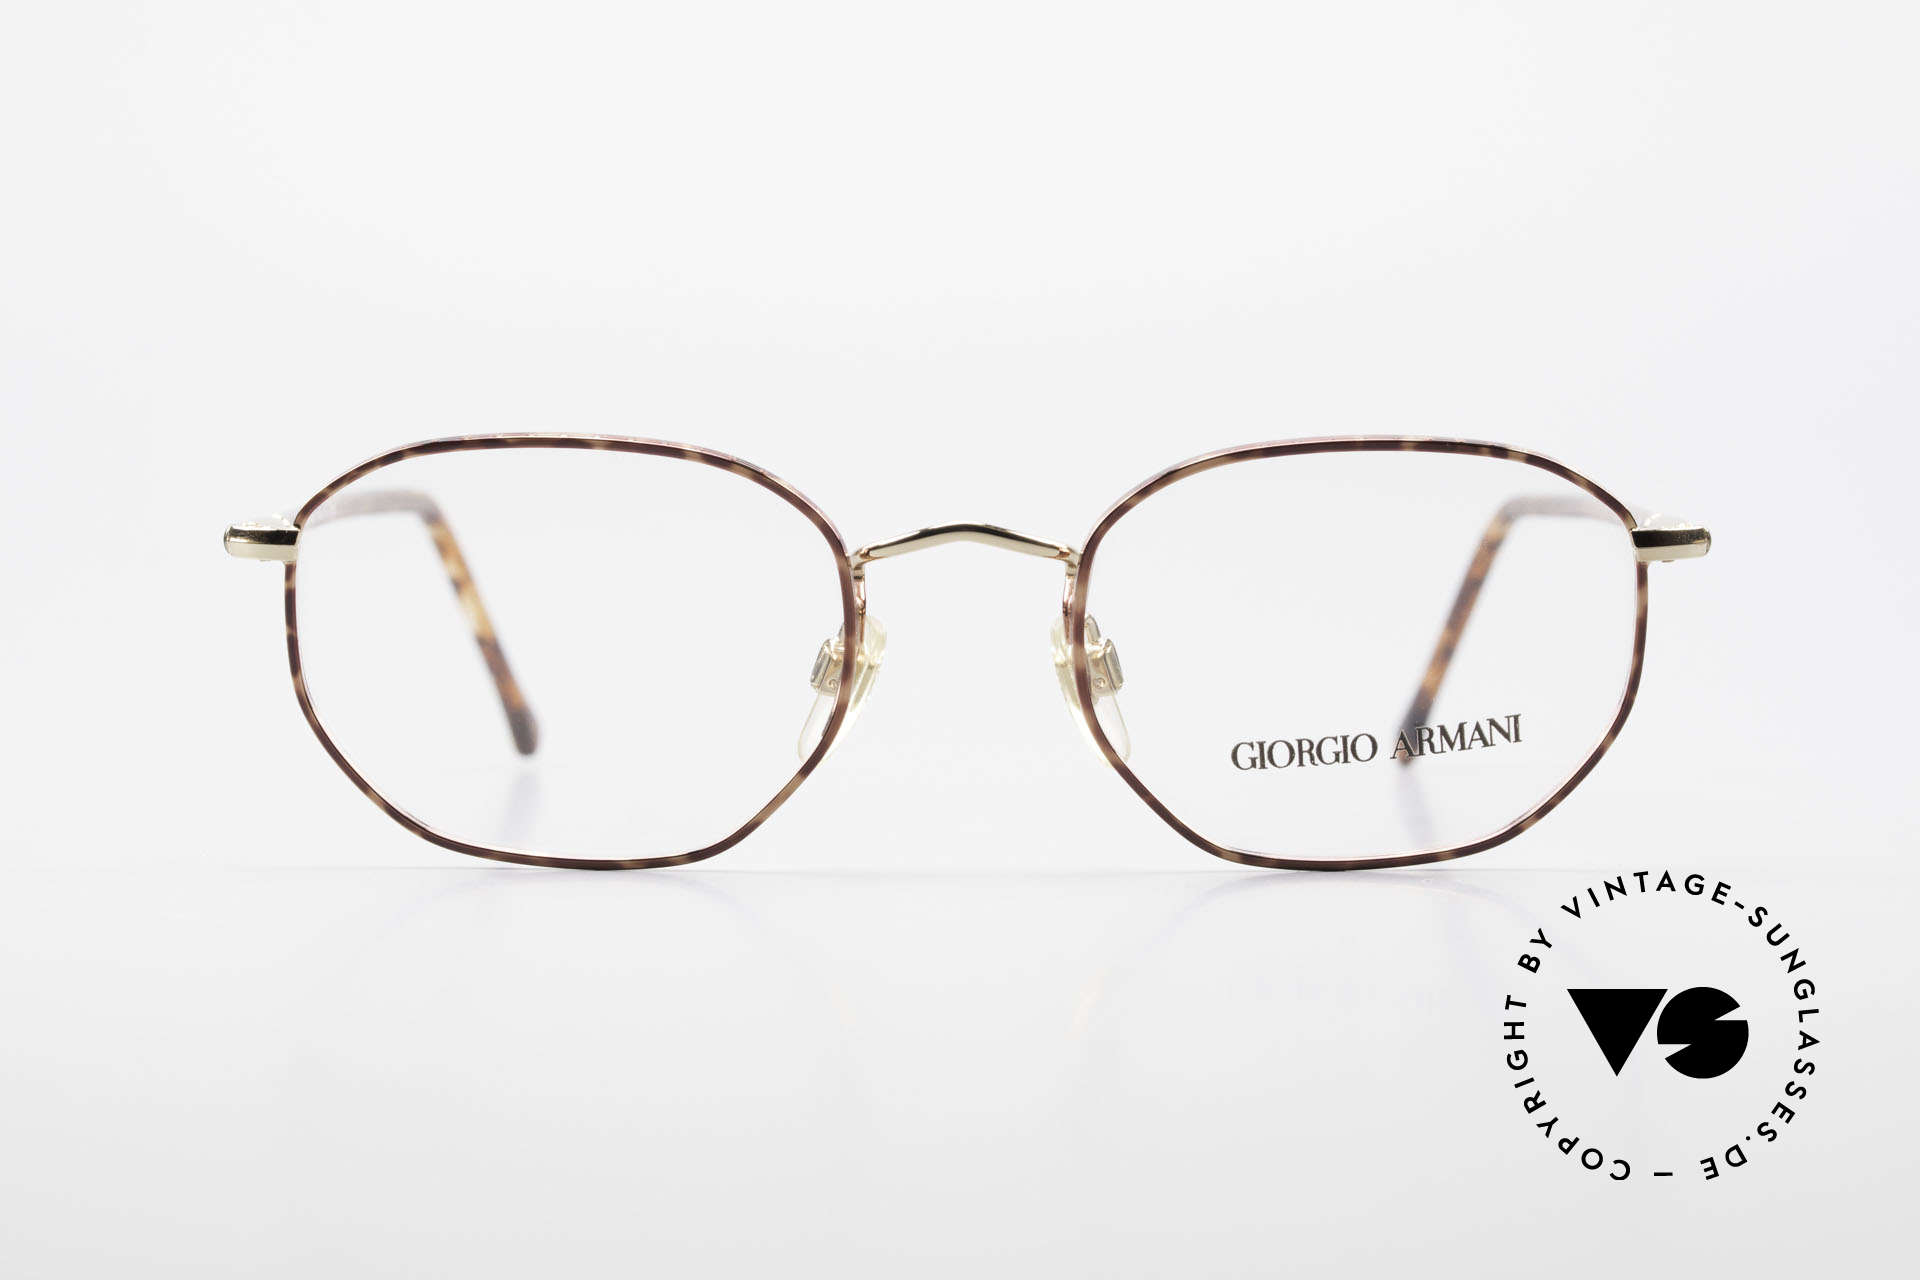 Giorgio Armani 187 Classic 90's Men's Eyeglasses, classic gentlemen's frame (rather a SMALL size 50/19), Made for Men